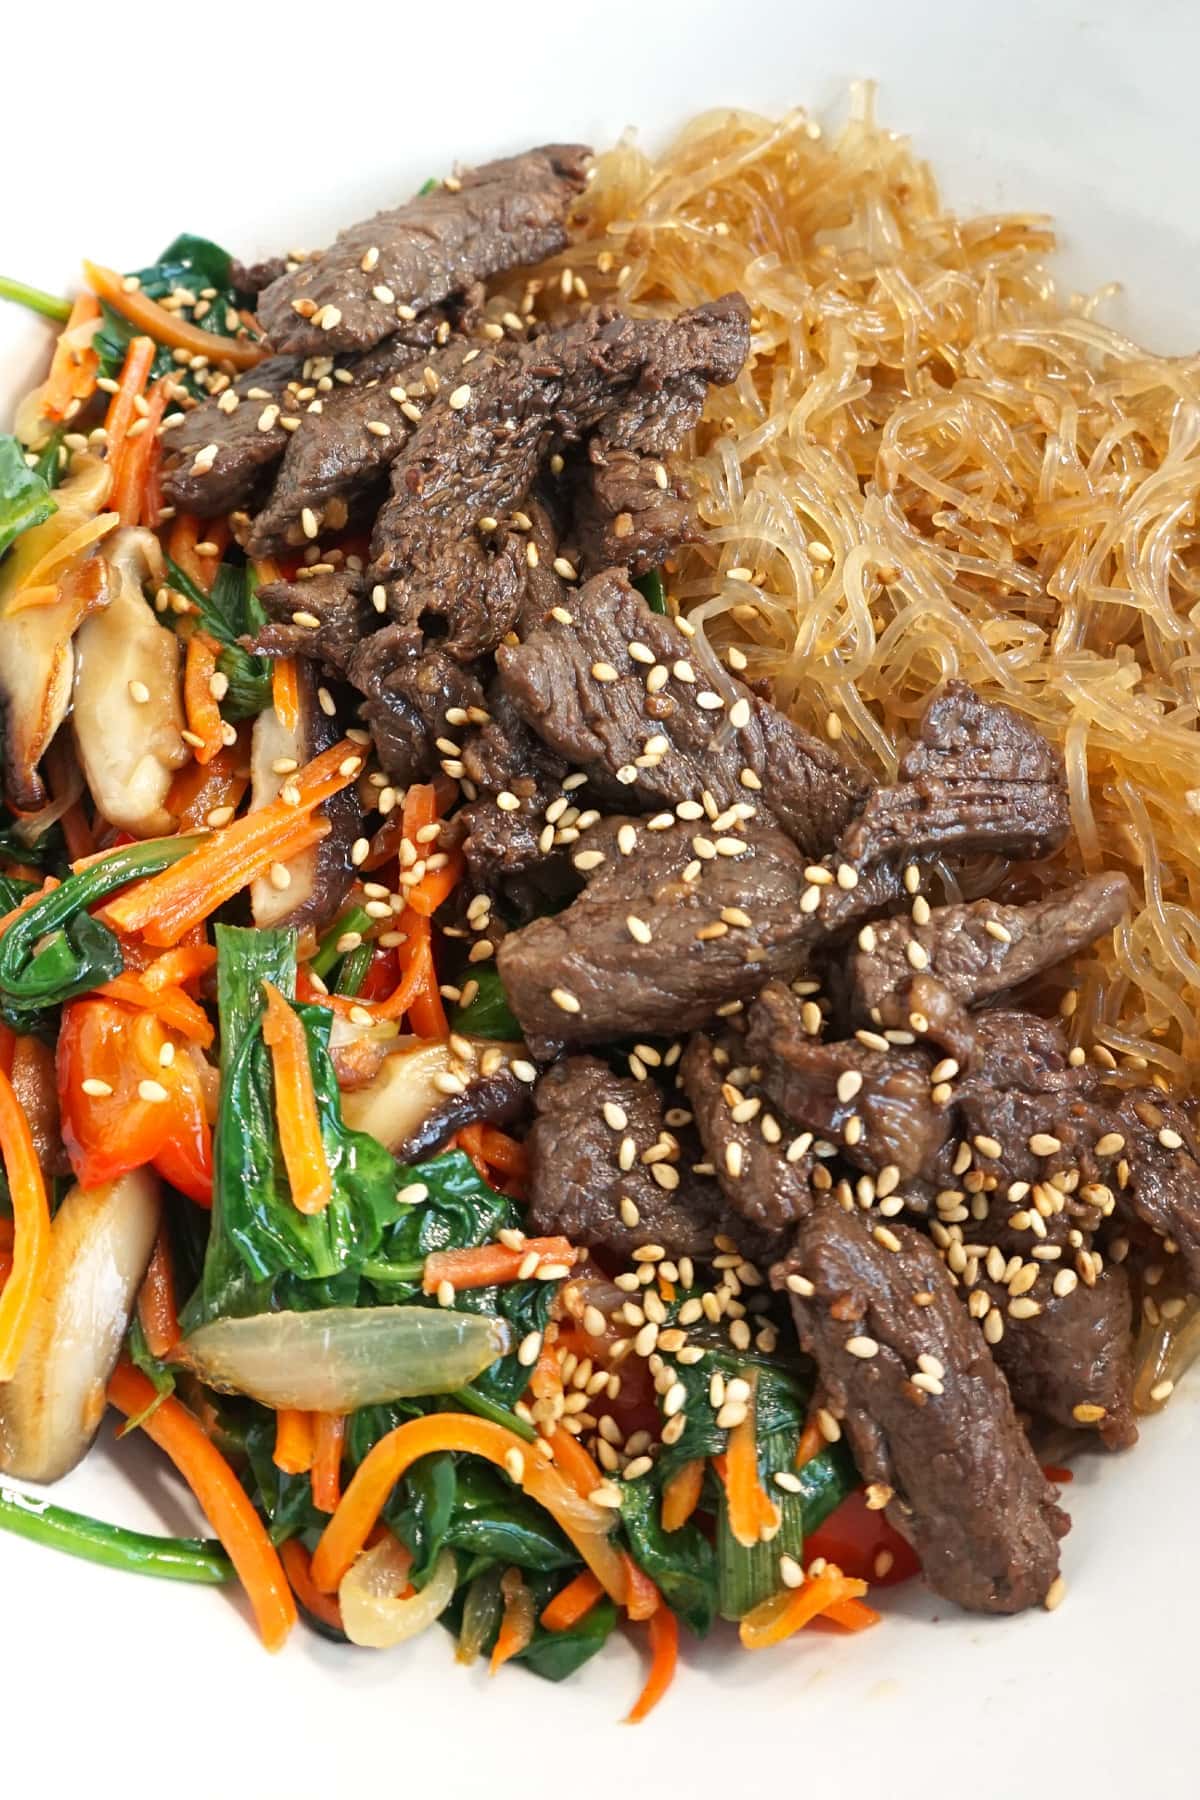 Bowl of cooked noodles, then beef, then veggies